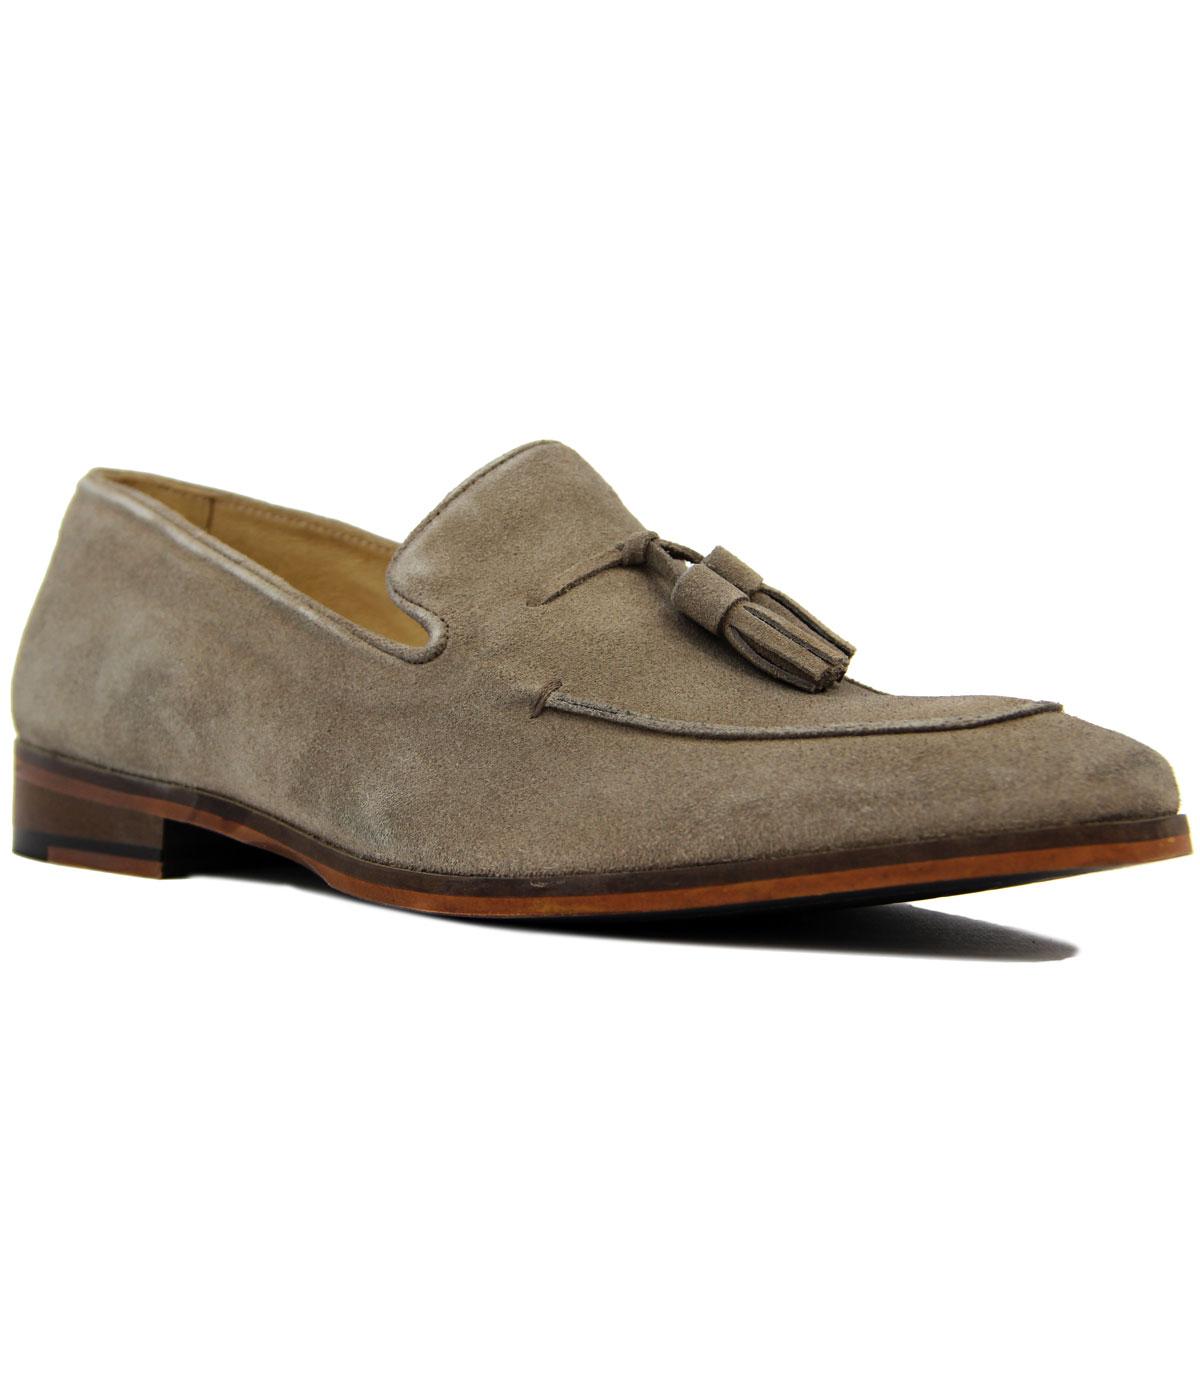 PAOLO VANDINI Northbourne Retro 1960s Mod Suede Loafers in Taupe